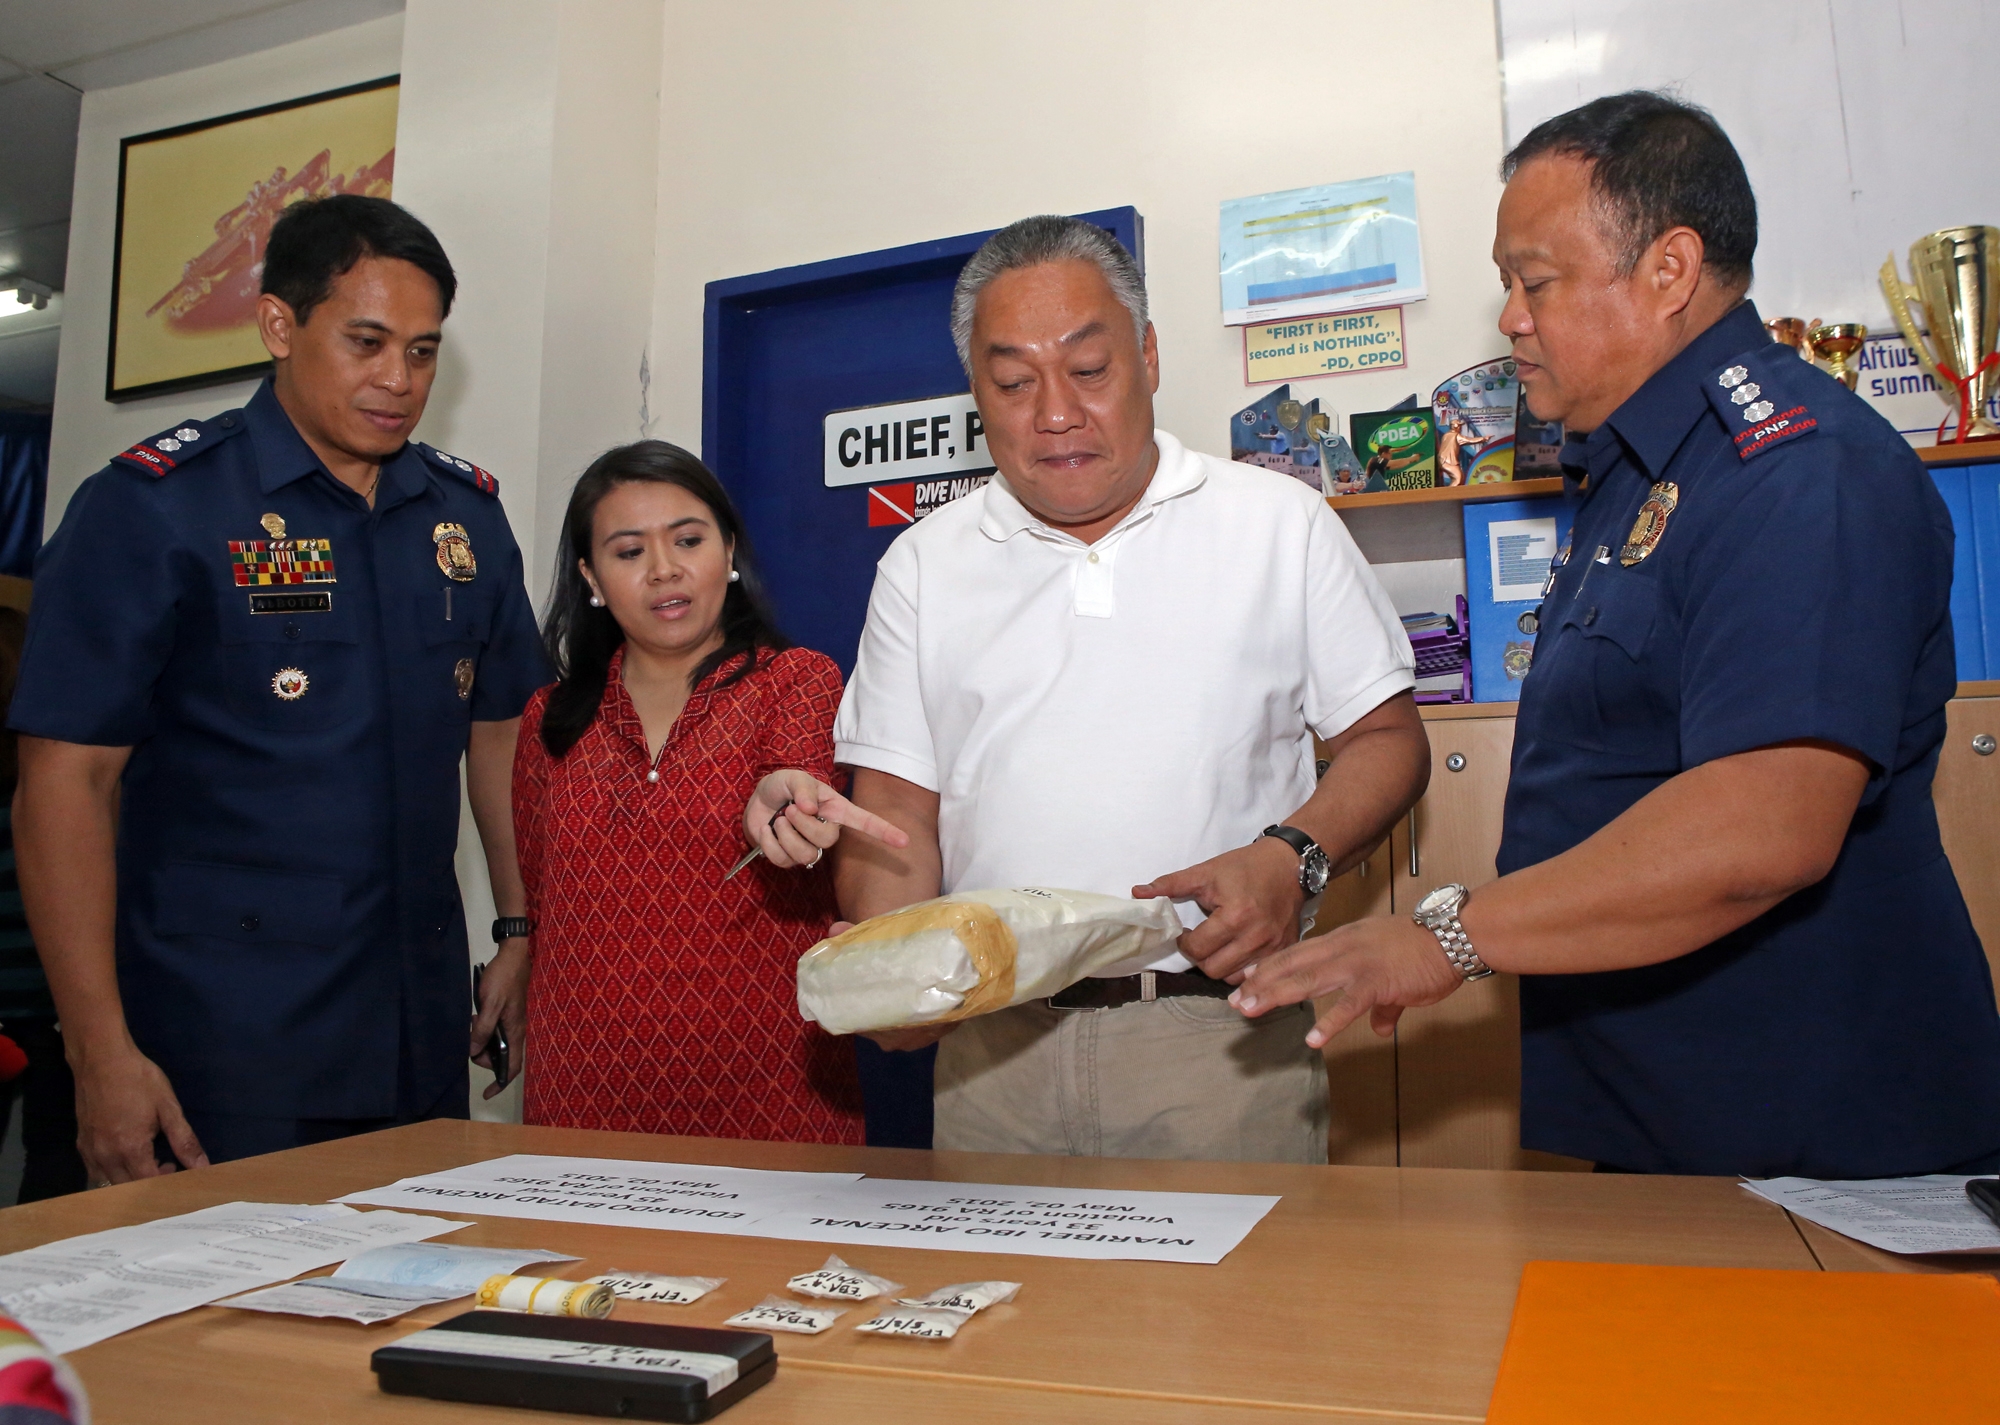 Cebu Gov. Hilario Davide III inspects a pack containing 2 kilos of shabu, which was confiscated during a May 2, 2015 operation in San Remigio town in northern Cebu. (CDN FILE)